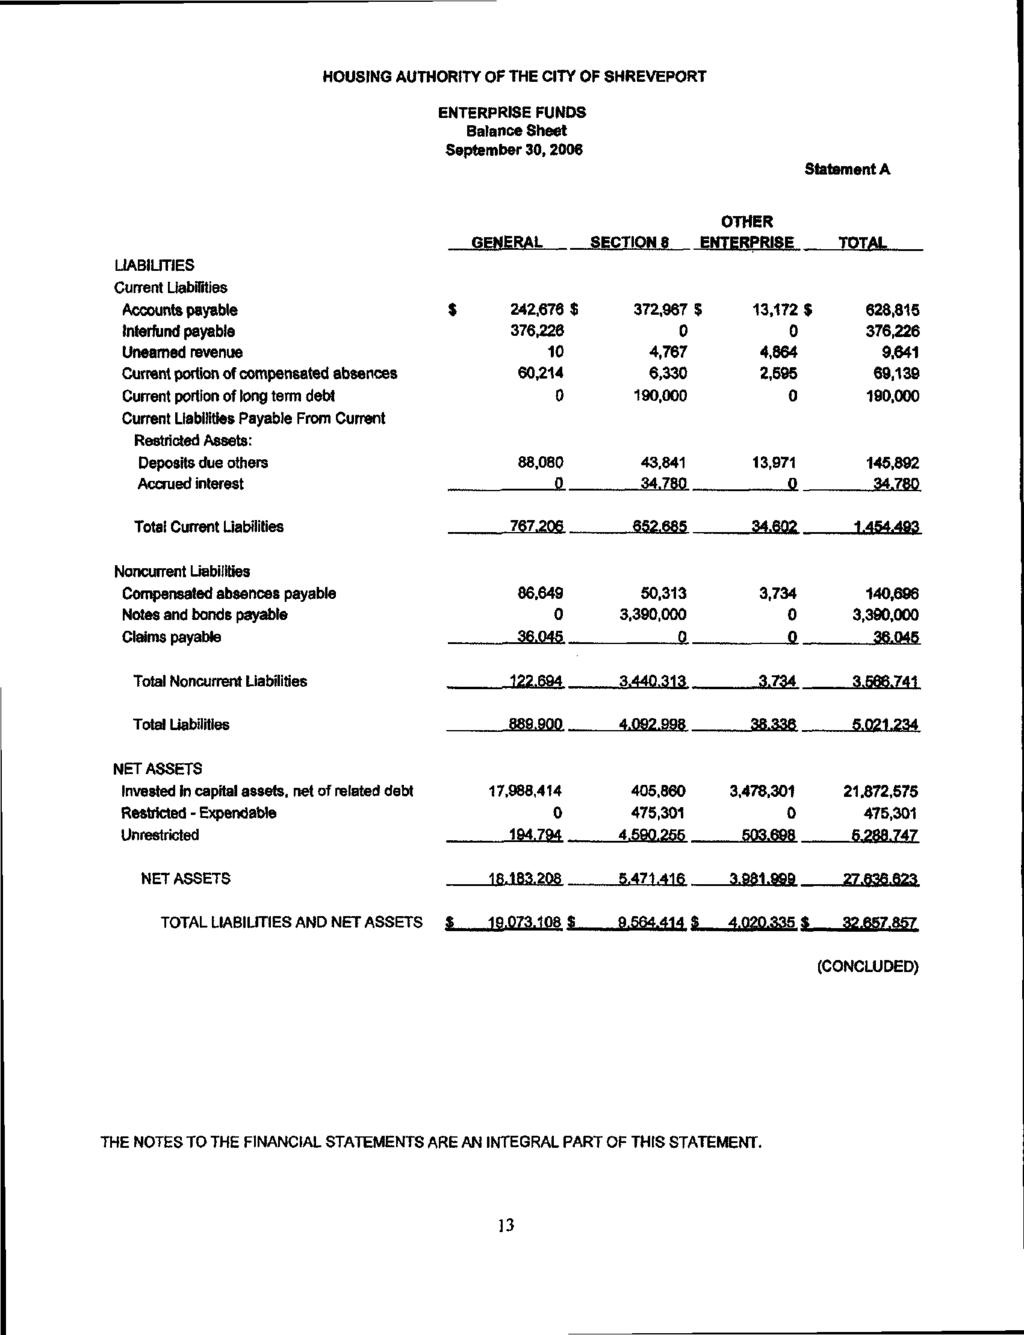 HOUSING AUTHORITY OF THE CITY OF SHREVEPORT ENTERPRISE FUNDS Balance Sheet September 3,26 Statement A LIABILITIES Current Liabilities Accounts payable tnterfund payable Unearned revenue Current